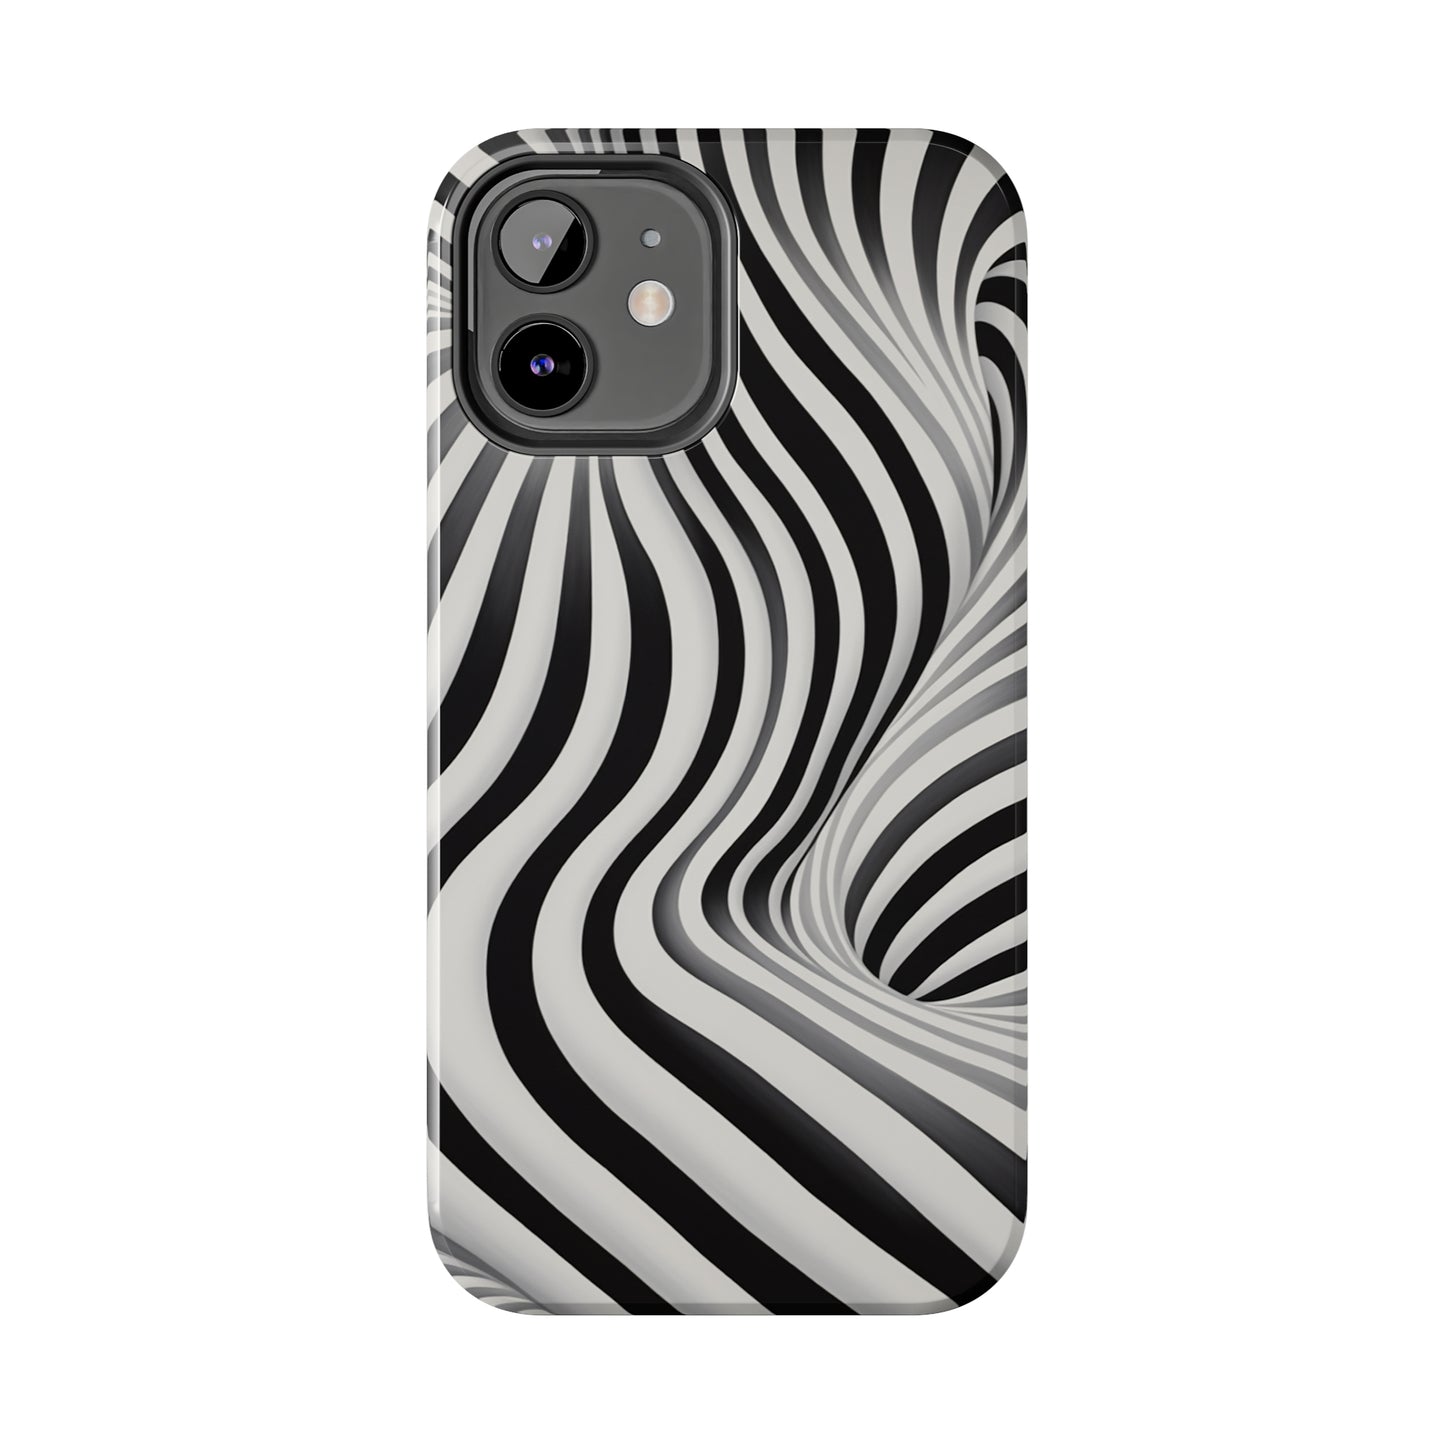 Twist Your Perception: Optical Illusion Tough Case for Apple iPhone Models – Where Art Meets Function